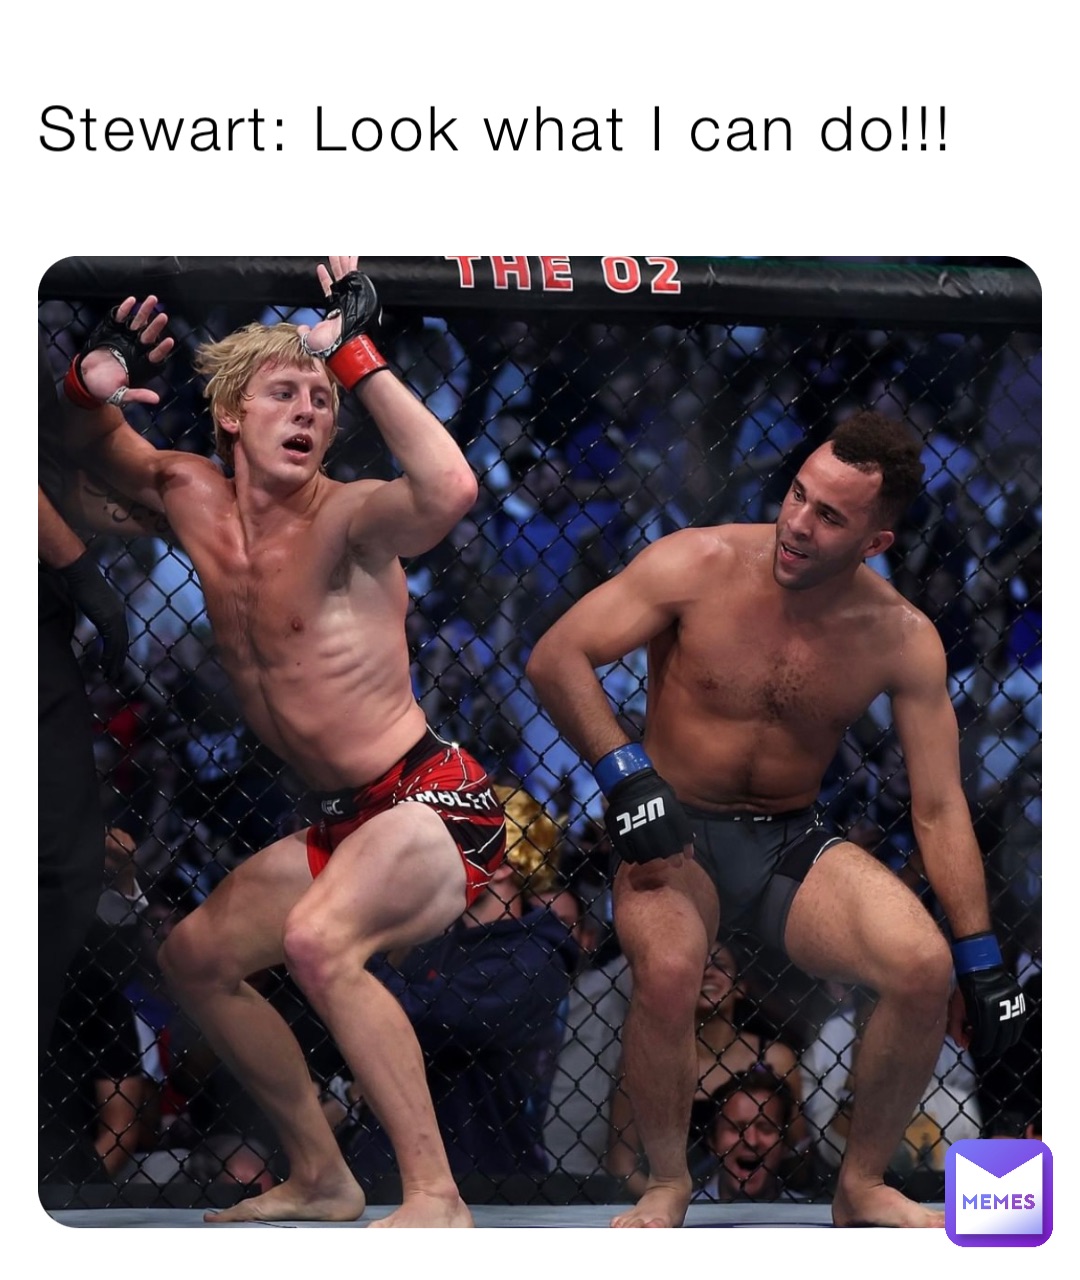 Stewart: Look what I can do!!!